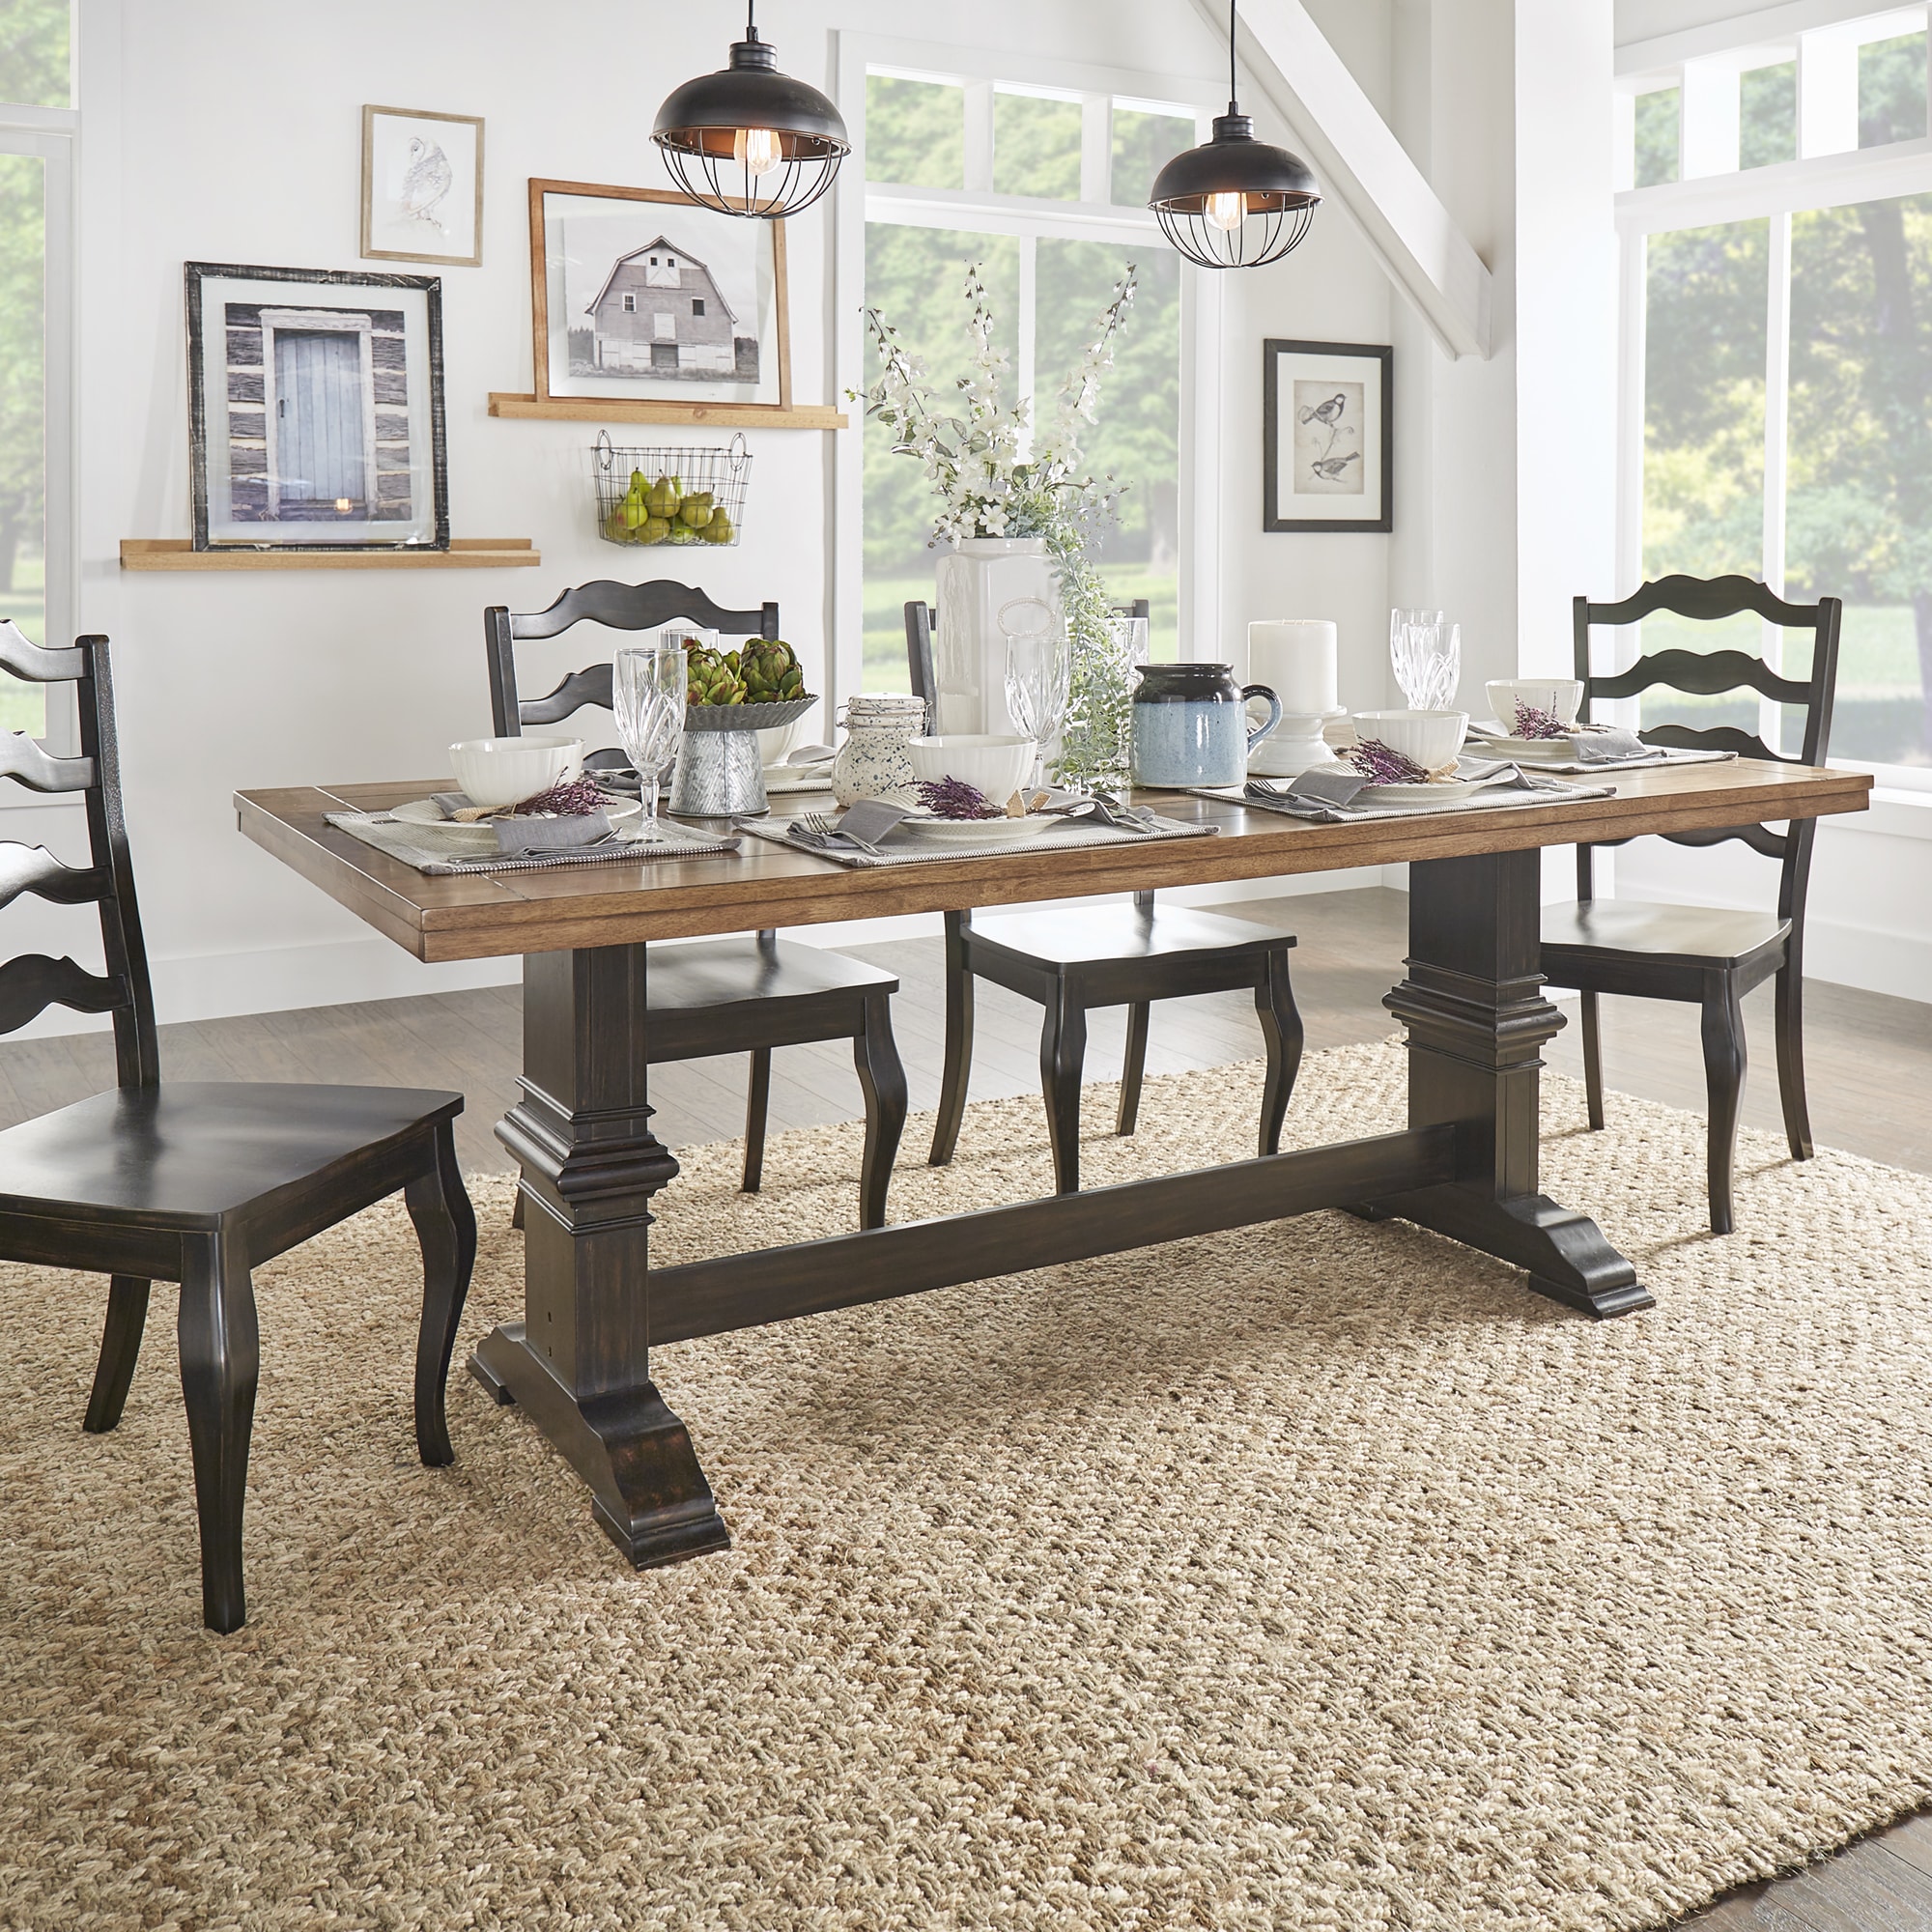 Eleanor Two Tone Rectangular Solid Wood Top Dining Table By Inspire Q Classic Ebay